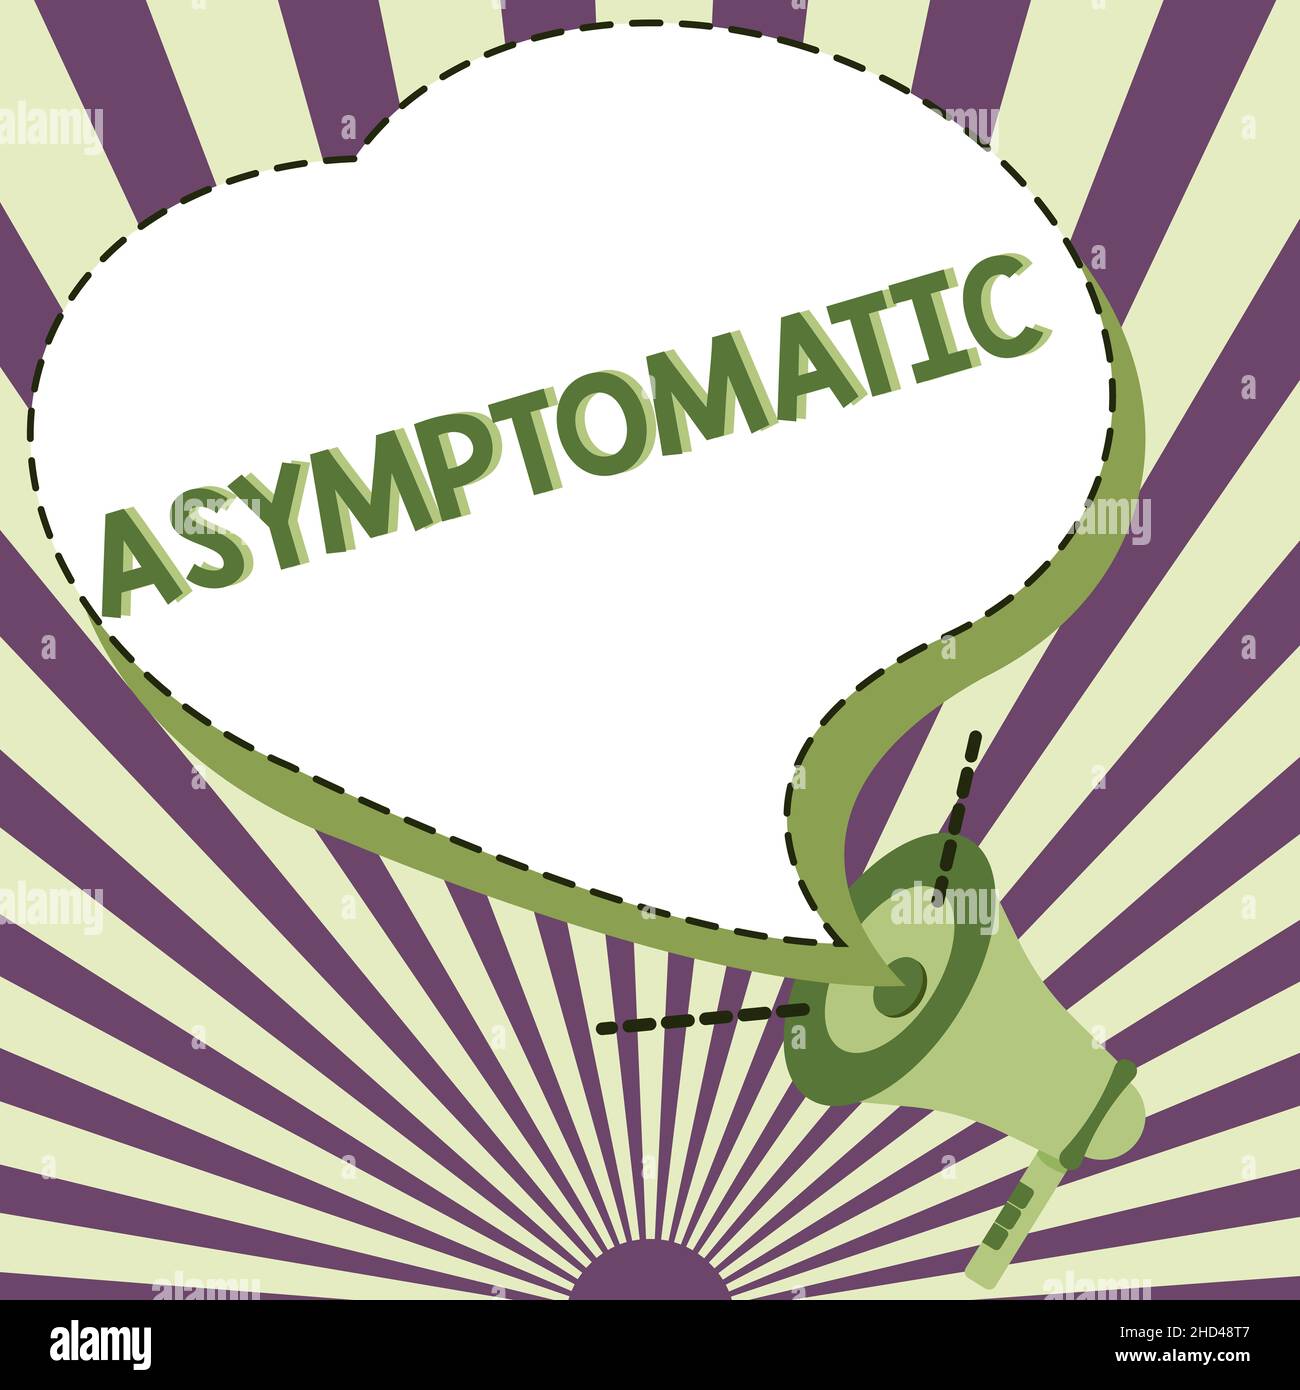 Text showing inspiration Asymptomatic. Word Written on a condition or a person producing or showing no symptoms Illustration Of A Loud Megaphone Stock Photo